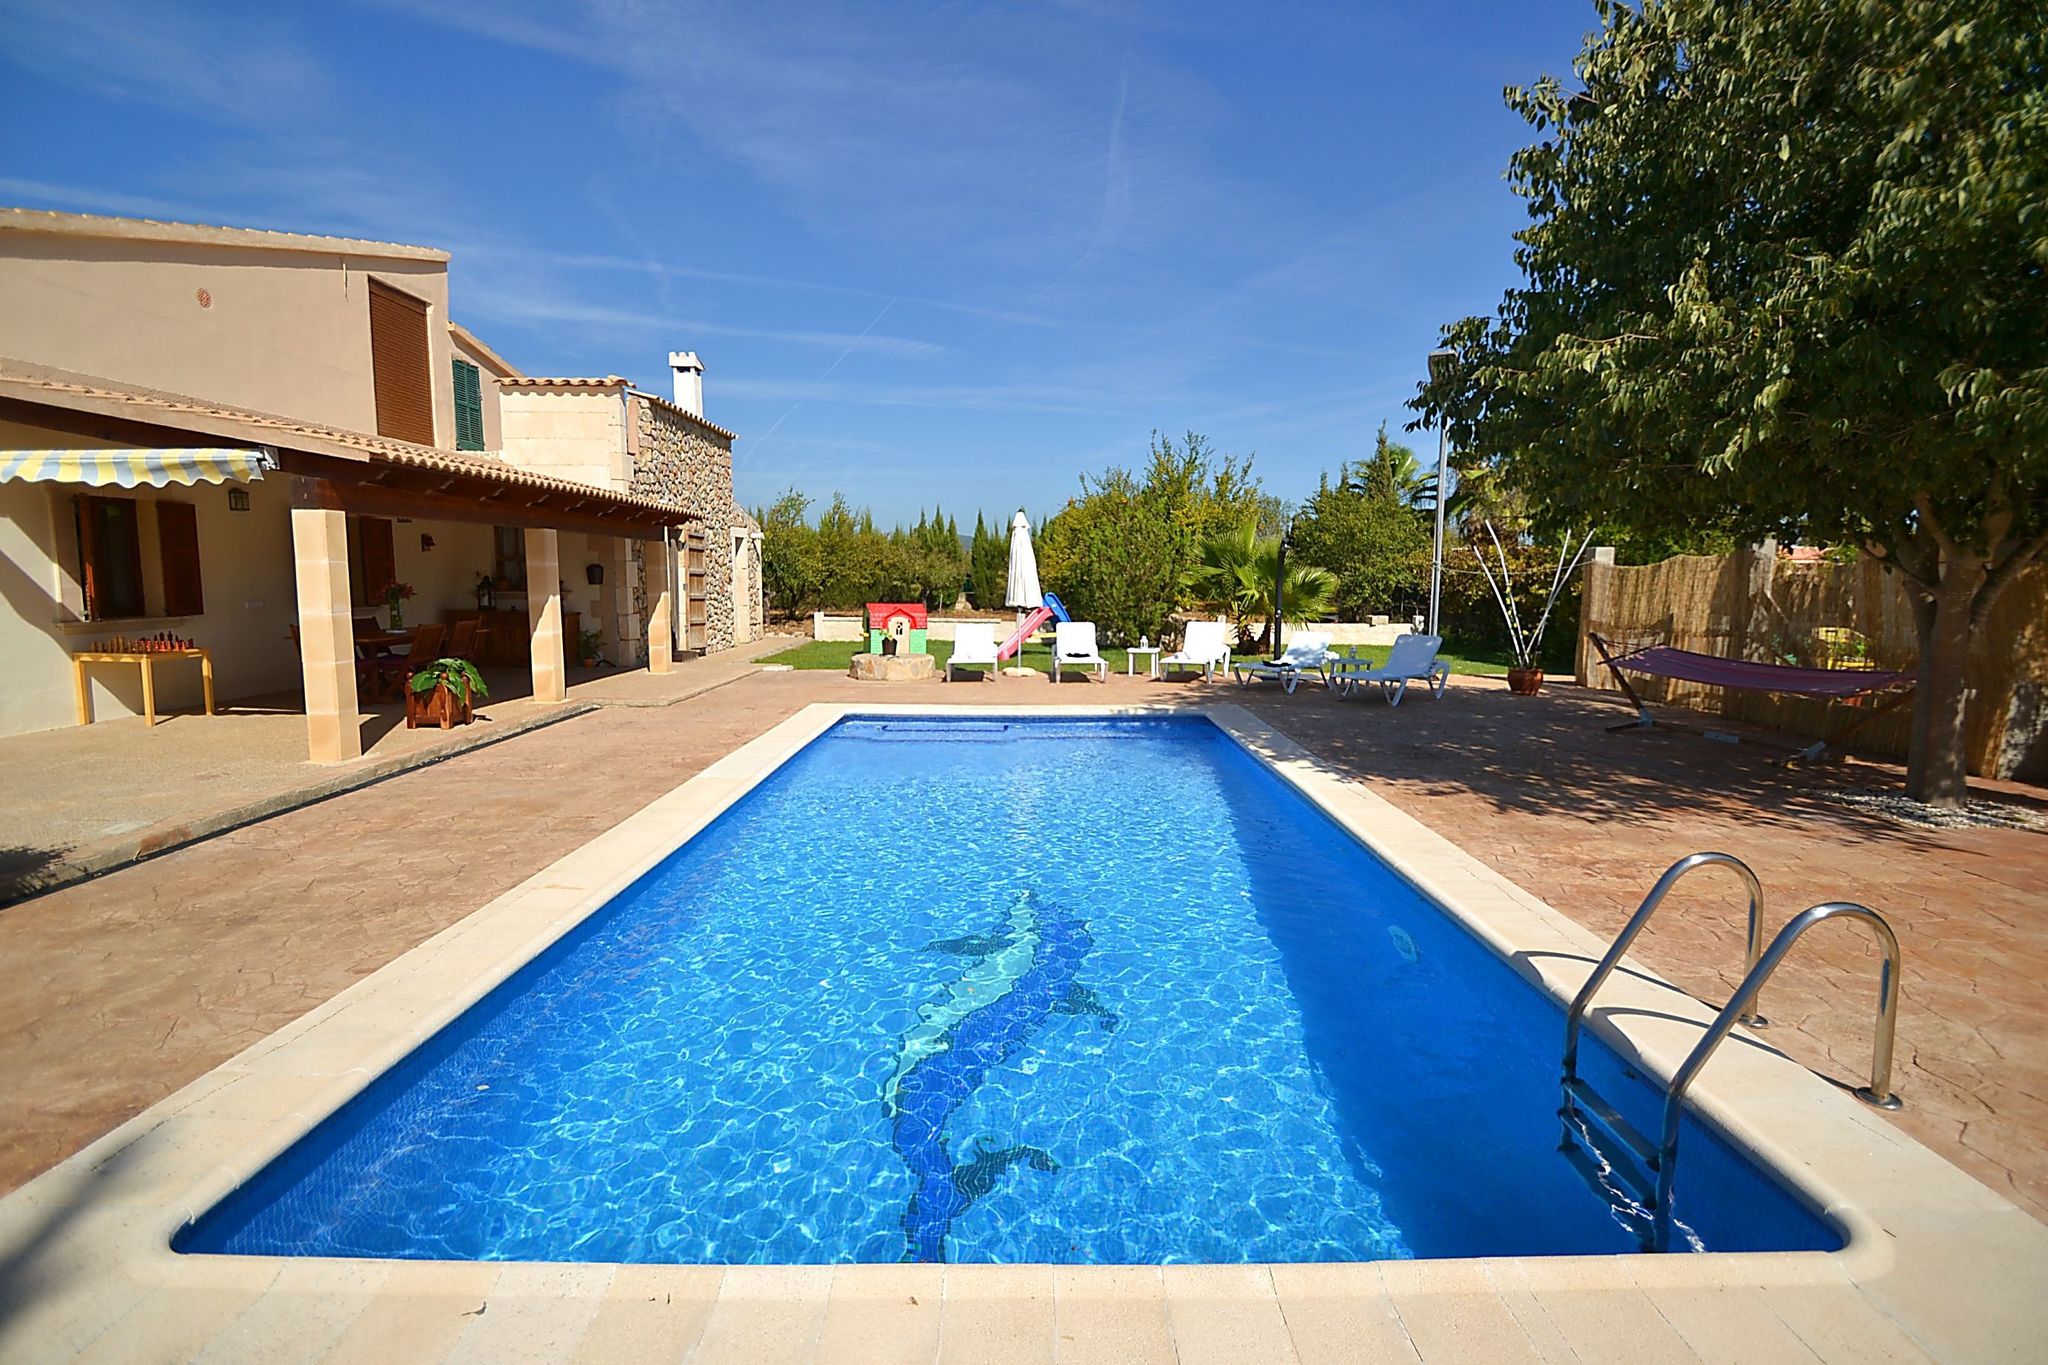 Beautiful country house with pool and air conditioning ideal for children